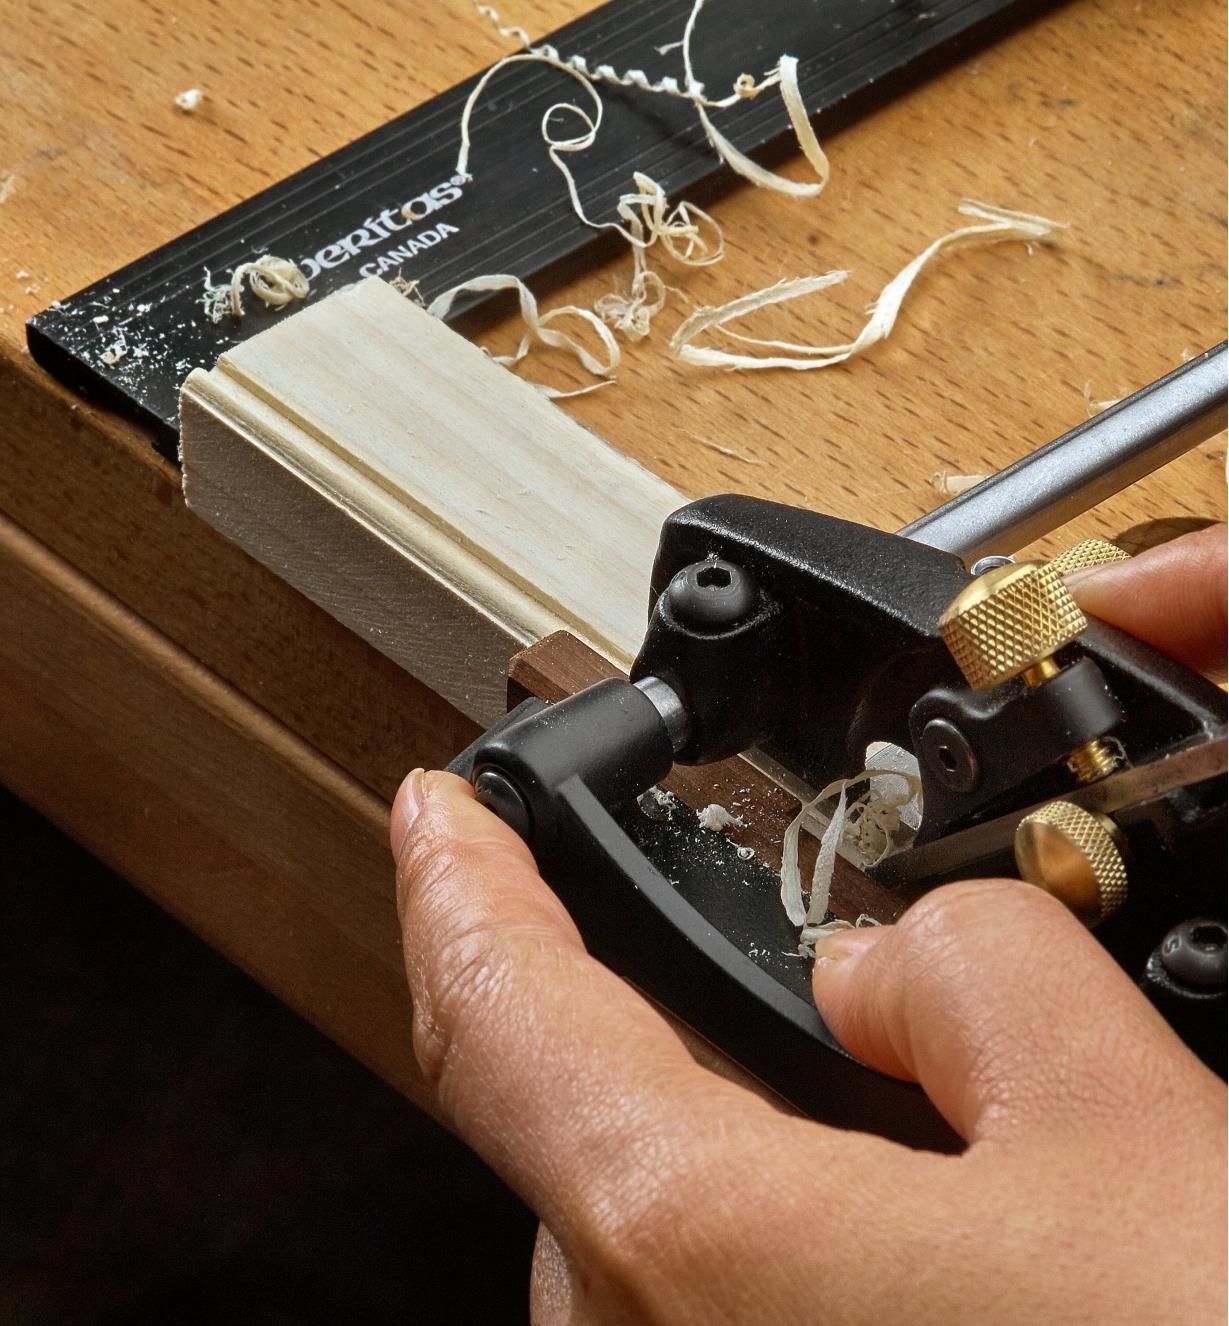 A right-hand box-maker’s plow plane being used to cut beading on the edge of a piece of wooden stock